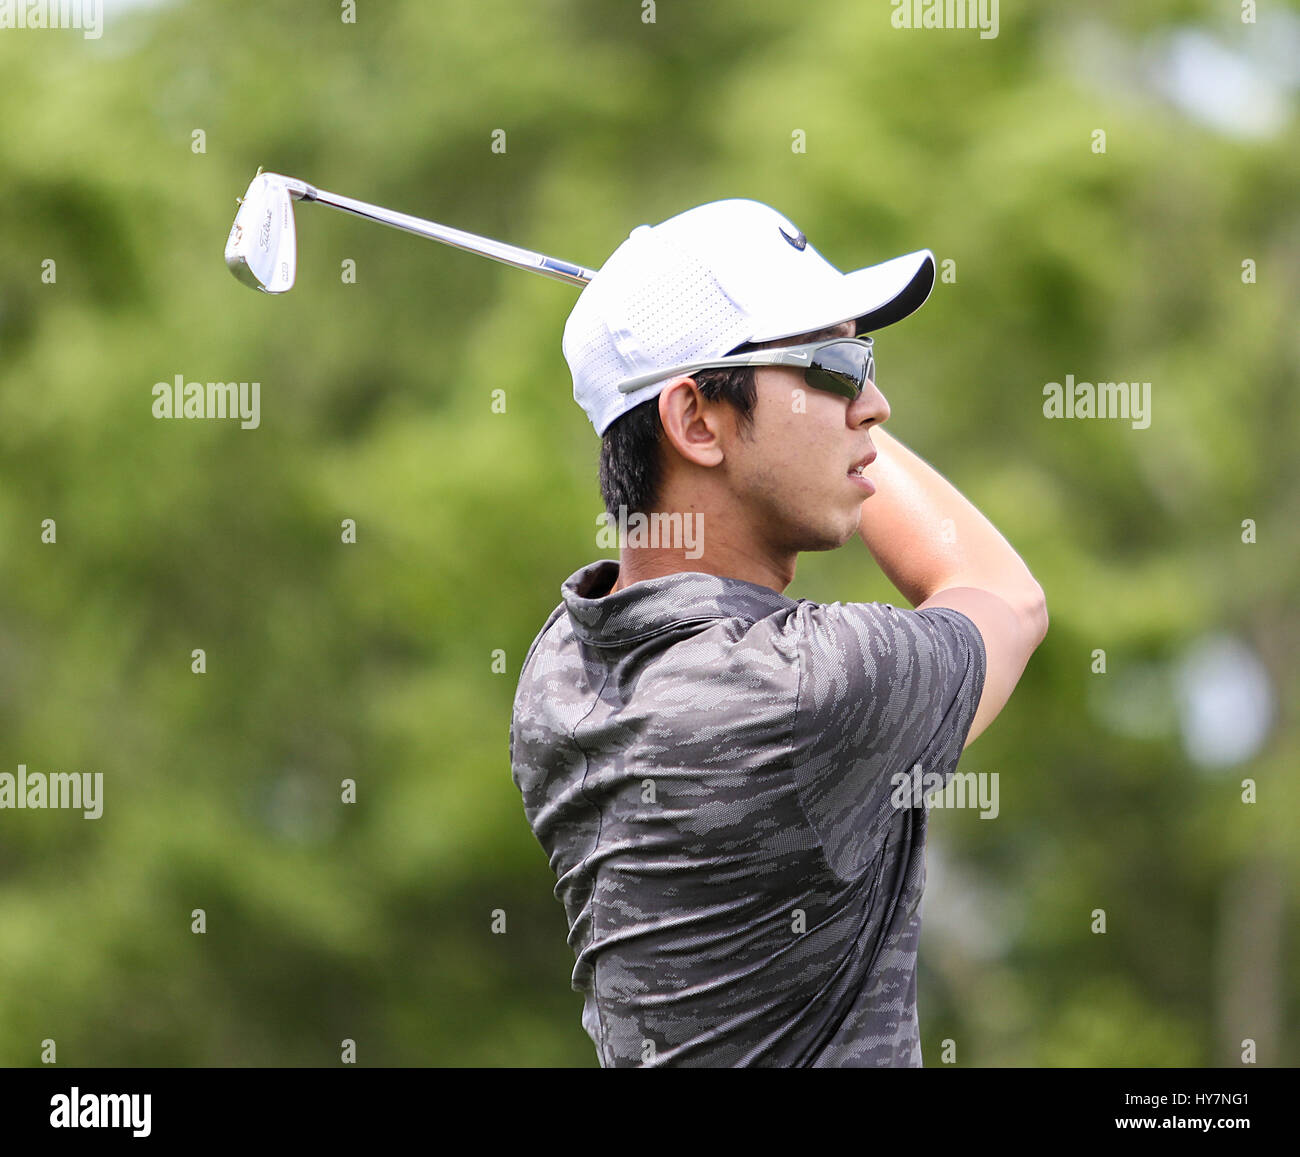 Humble, Texas, USA. 1st Apr, 2017. Seung-Yul Noh hits a shot during the third round of the Shell Houston Open at the Golf Club of Houston in Humble, Texas. John Glaser/CSM/Alamy Live News Stock Photo